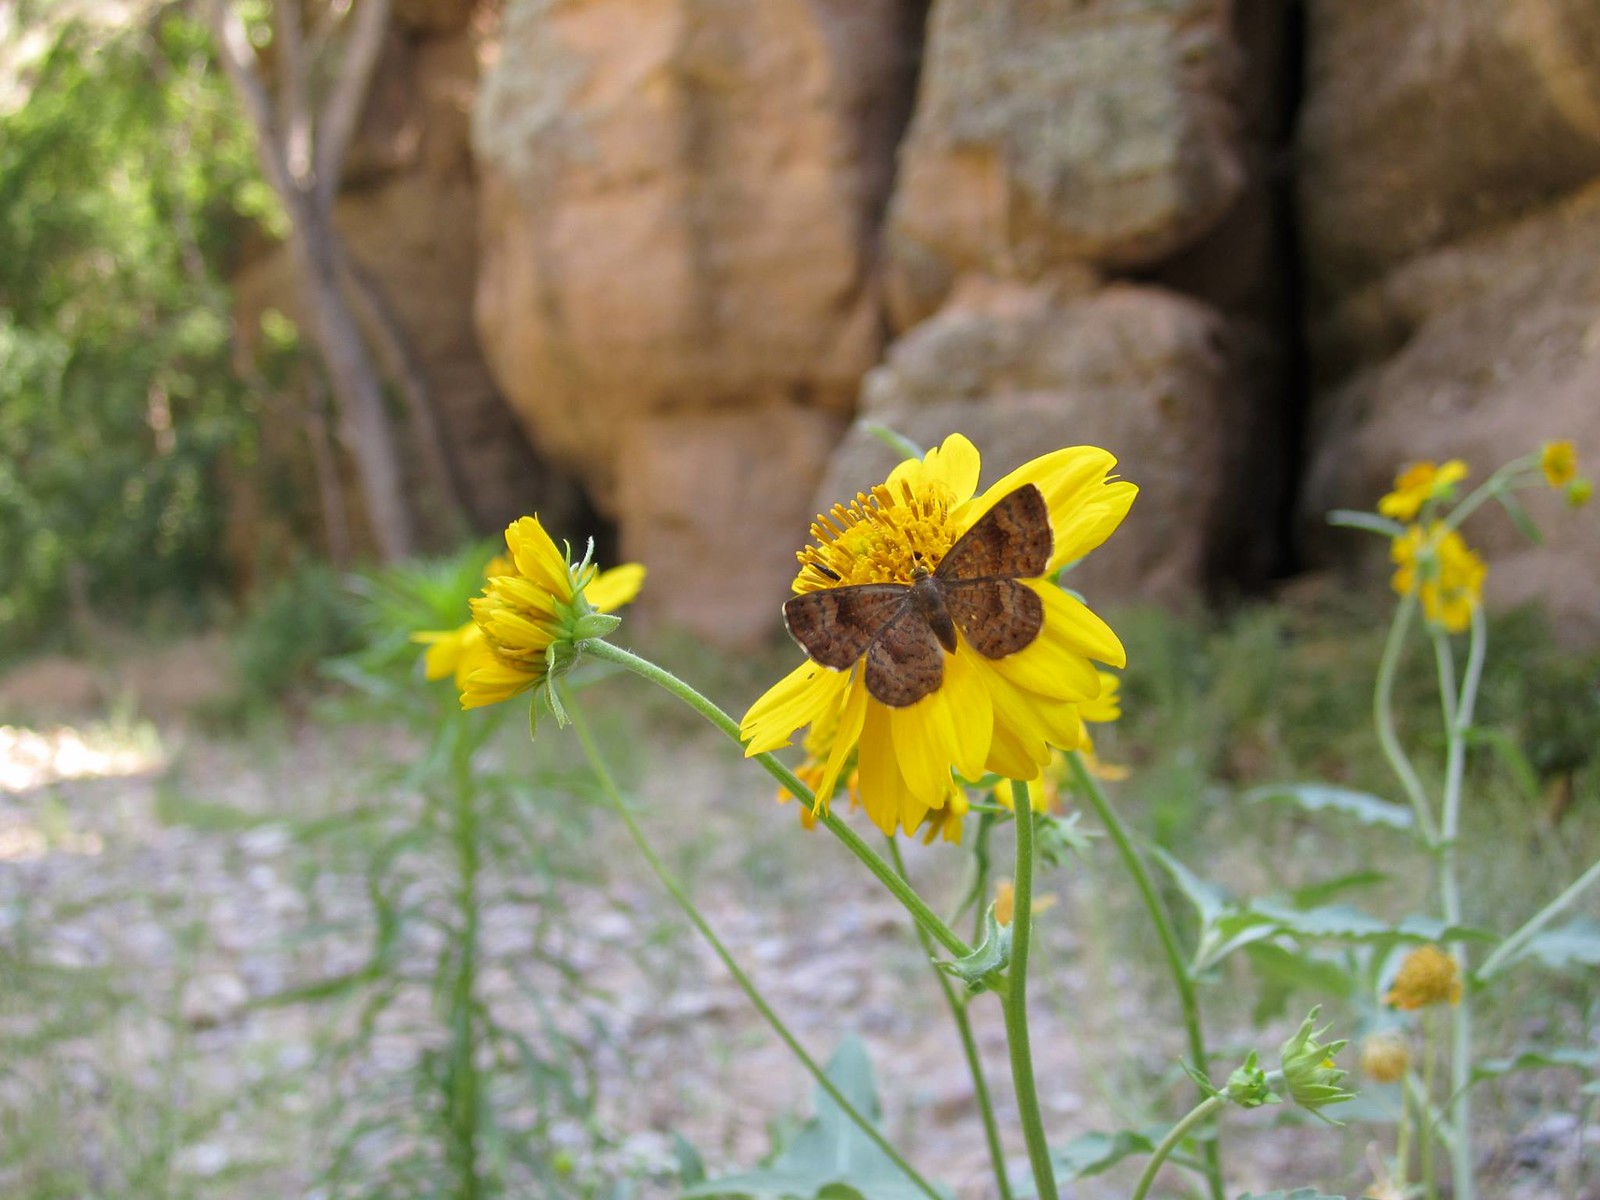 Pollinators are busy in the Aravaipa Canyon Wilderness